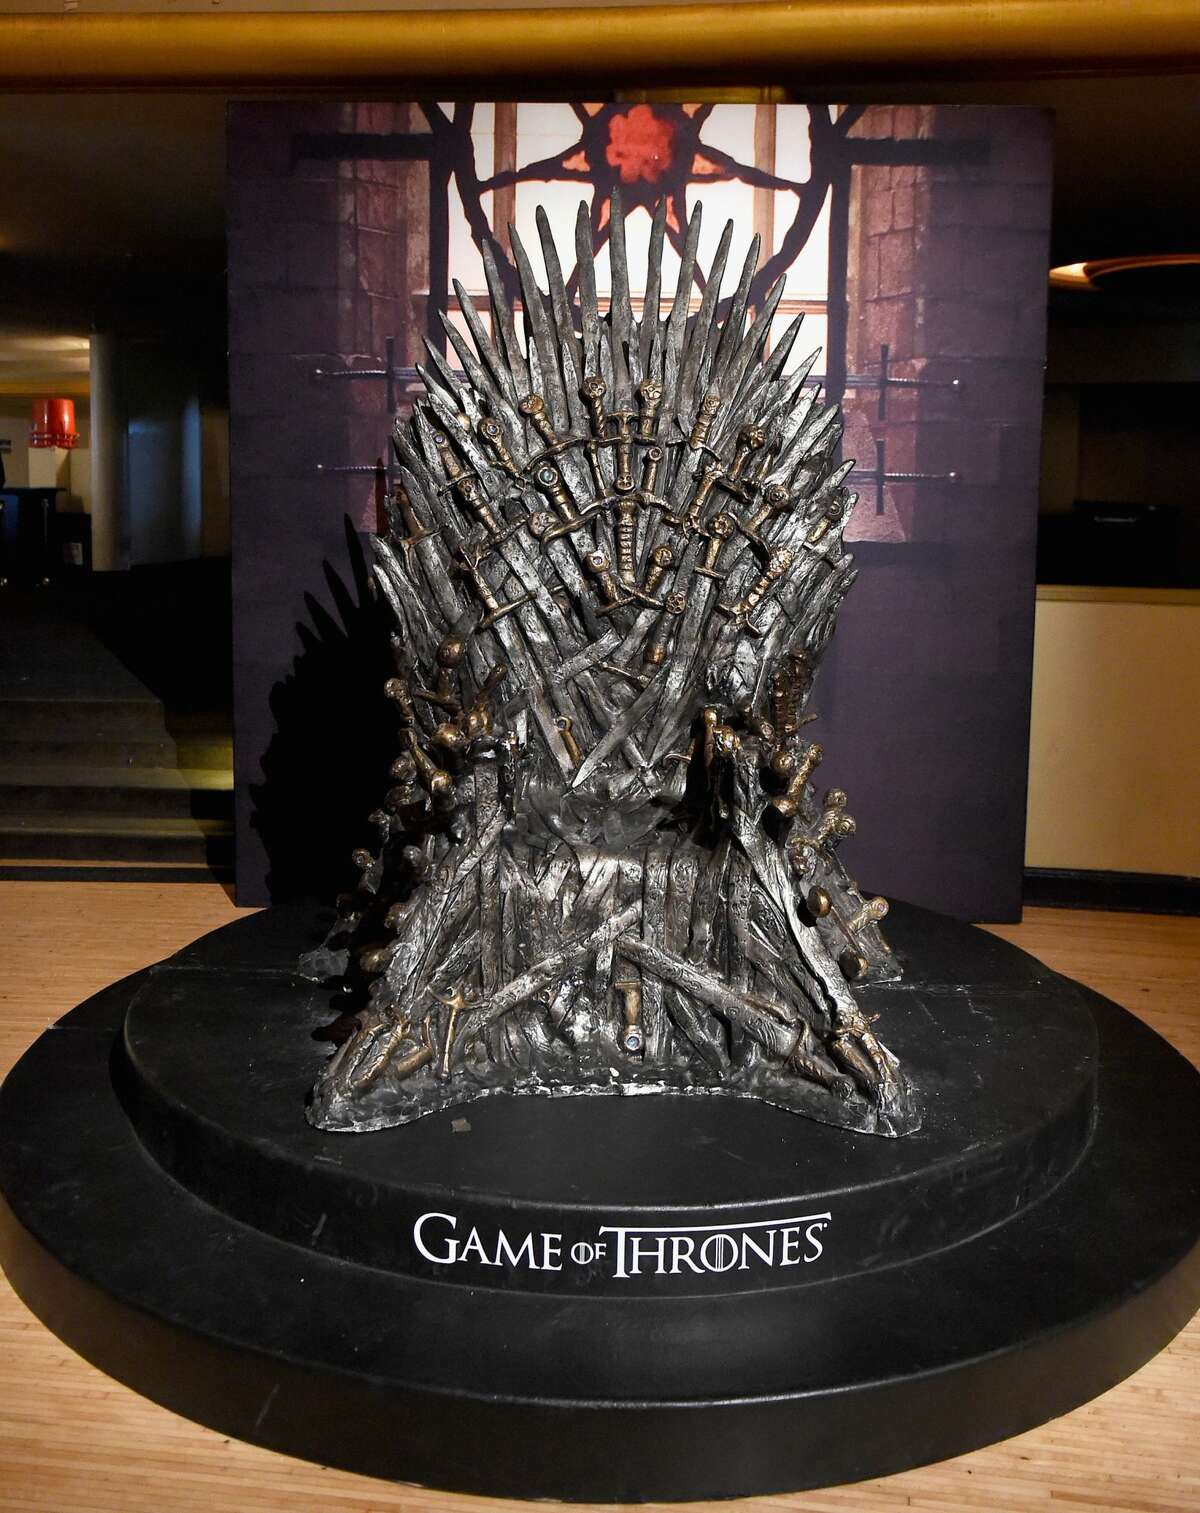 LOS ANGELES, CA - AUGUST 08: The Iron Throne on display during the announcement of the Game of ThronesÂ® Live Concert Experience featuring composer Ramin Djawadi at the Hollywood Palladium on August 8, 2016 in Los Angeles, California. (Photo by Kevin Winter/Getty Images for Live nation Entertainment )